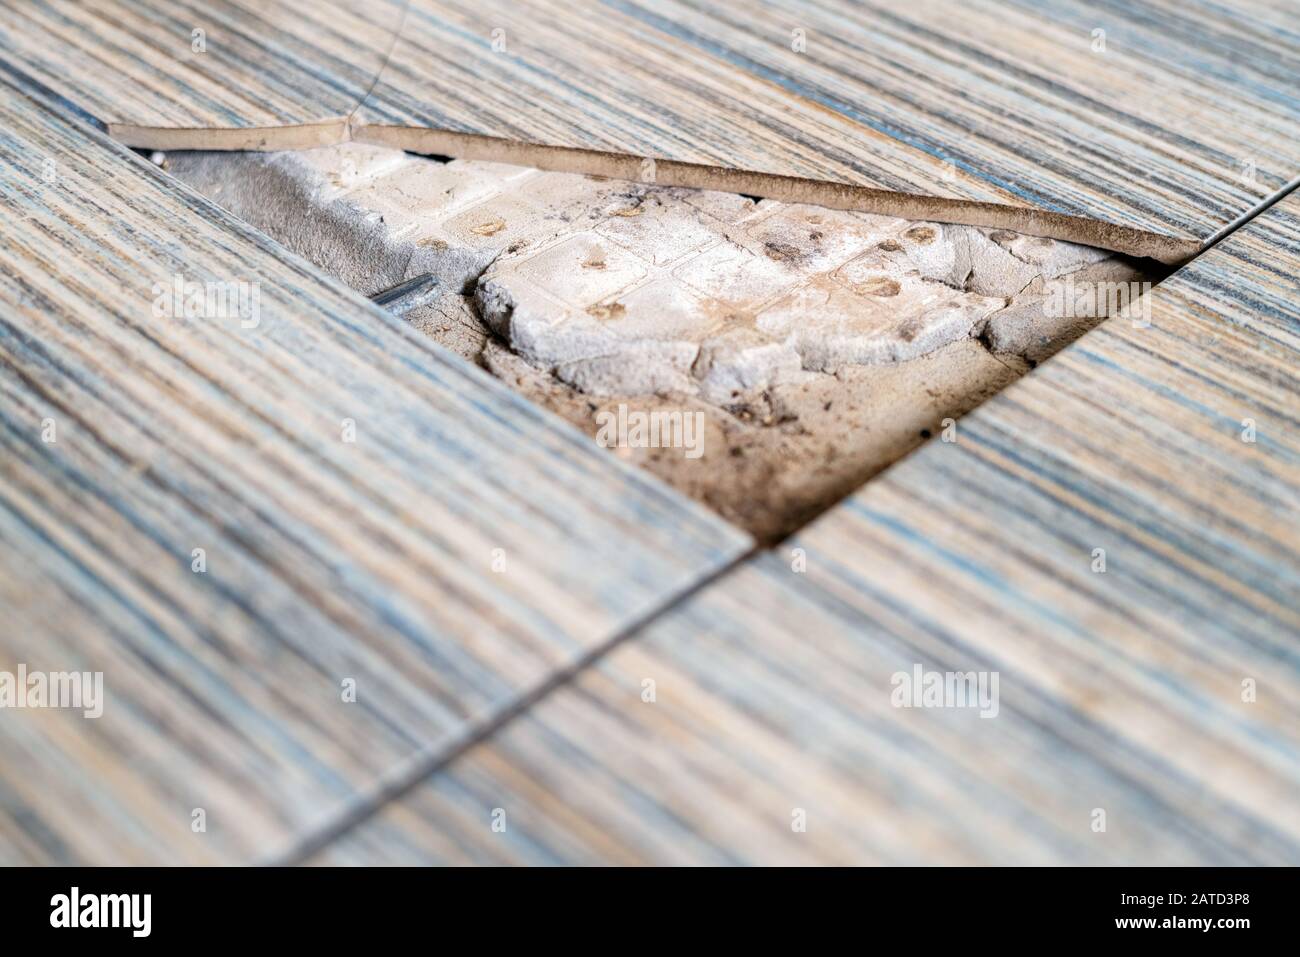 Close up view of broken tile in the bathroom. Cracked asbestos floor tile. Damaged ceramic tile background Stock Photo